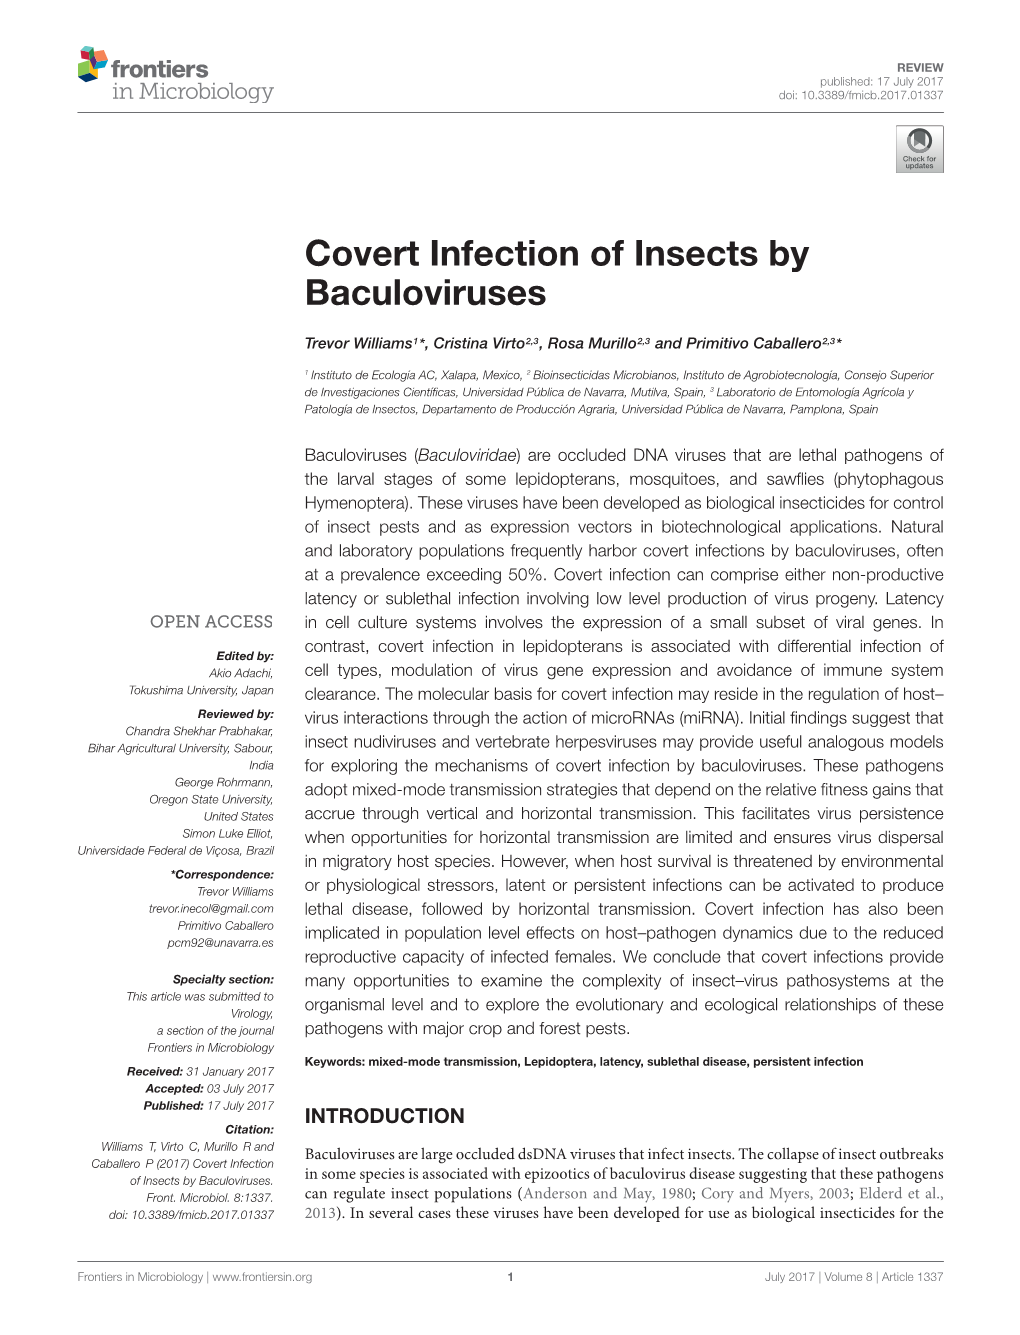 Covert Infection of Insects by Baculoviruses